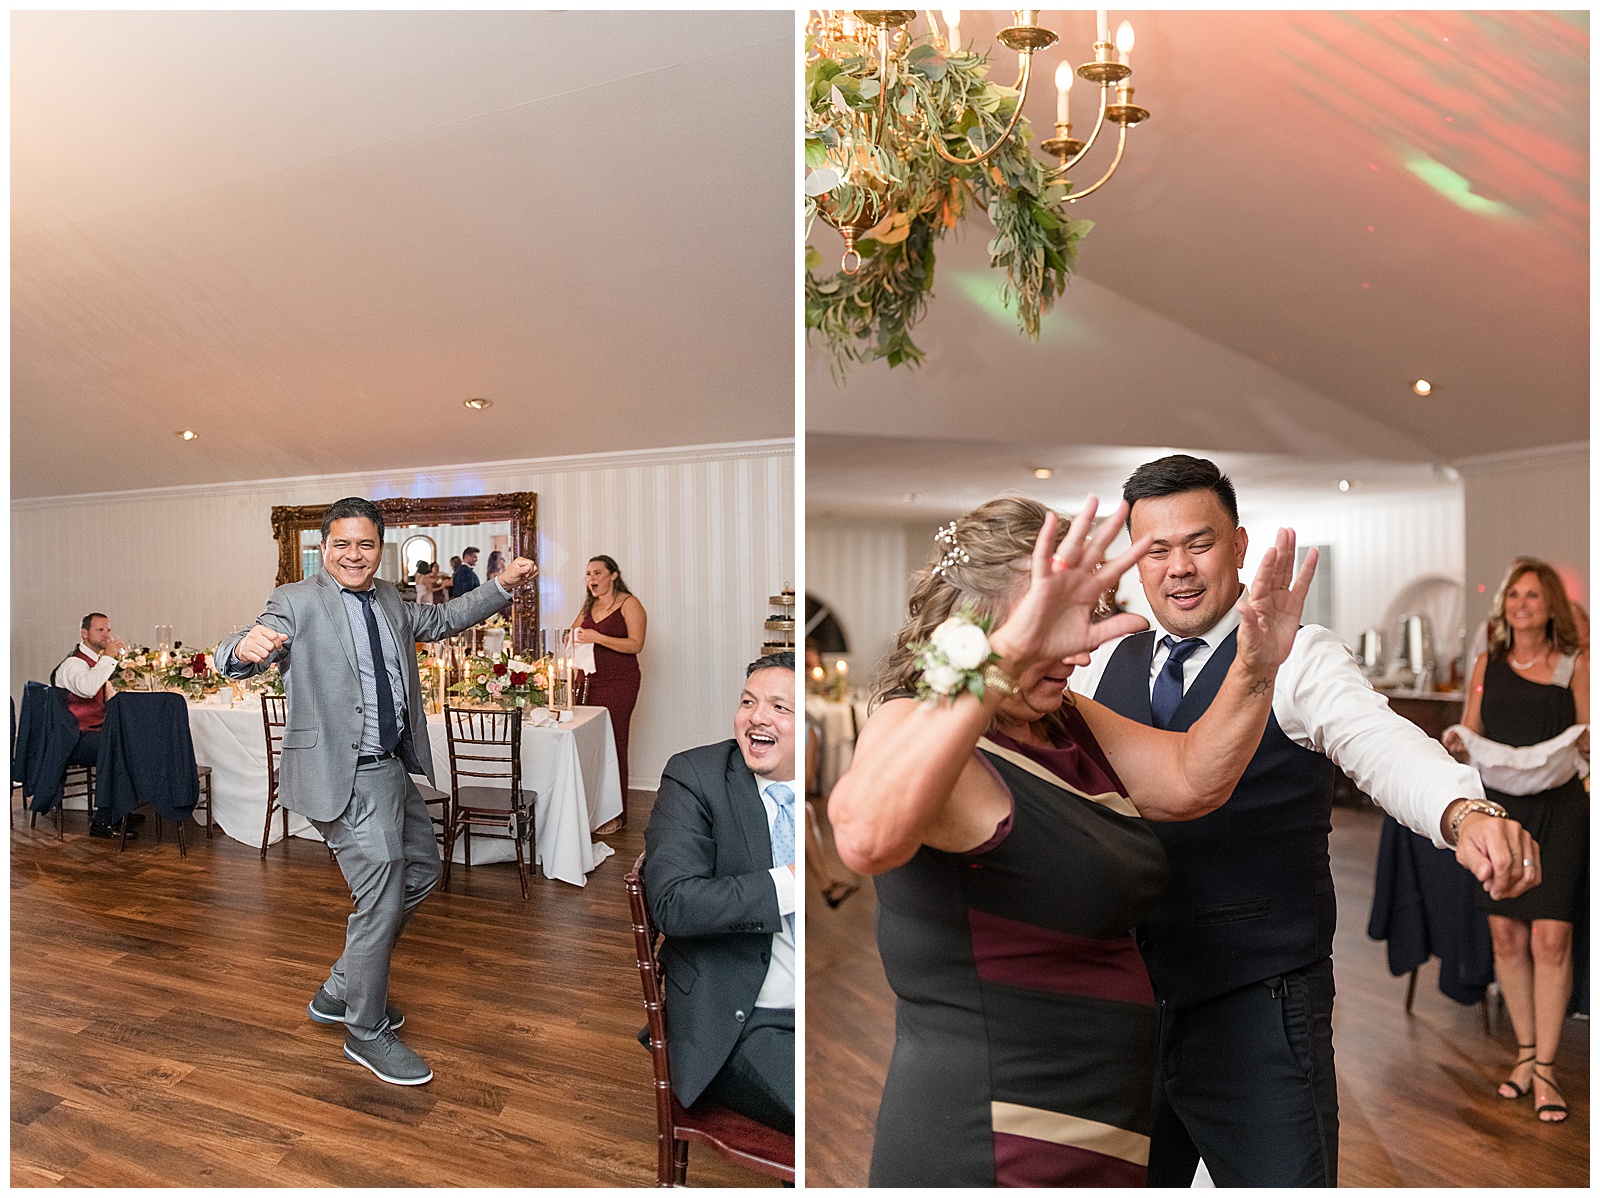 groom and wedding guests dancing and having fun during reception on wooden dance floor